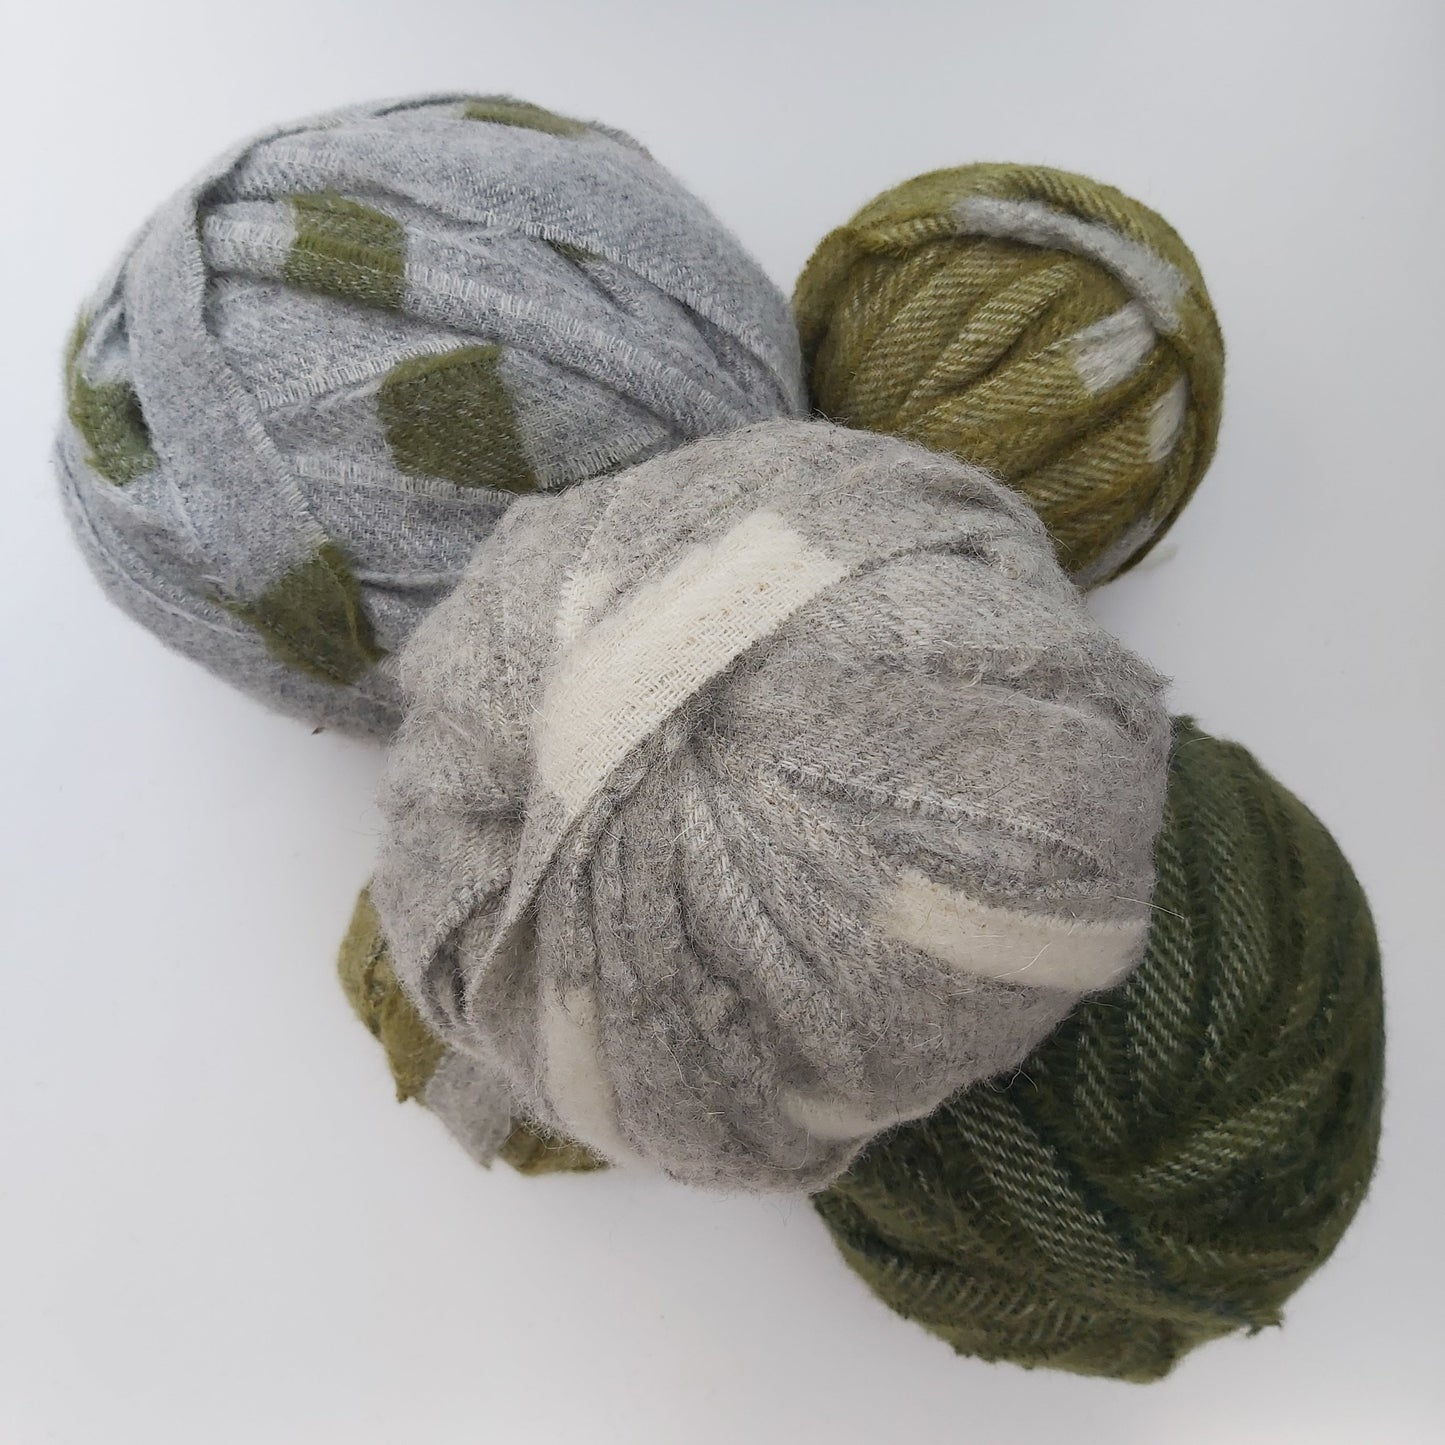 BE2K-215 Blanket Edge 2kg Pine, Lime Green and Soft Grey